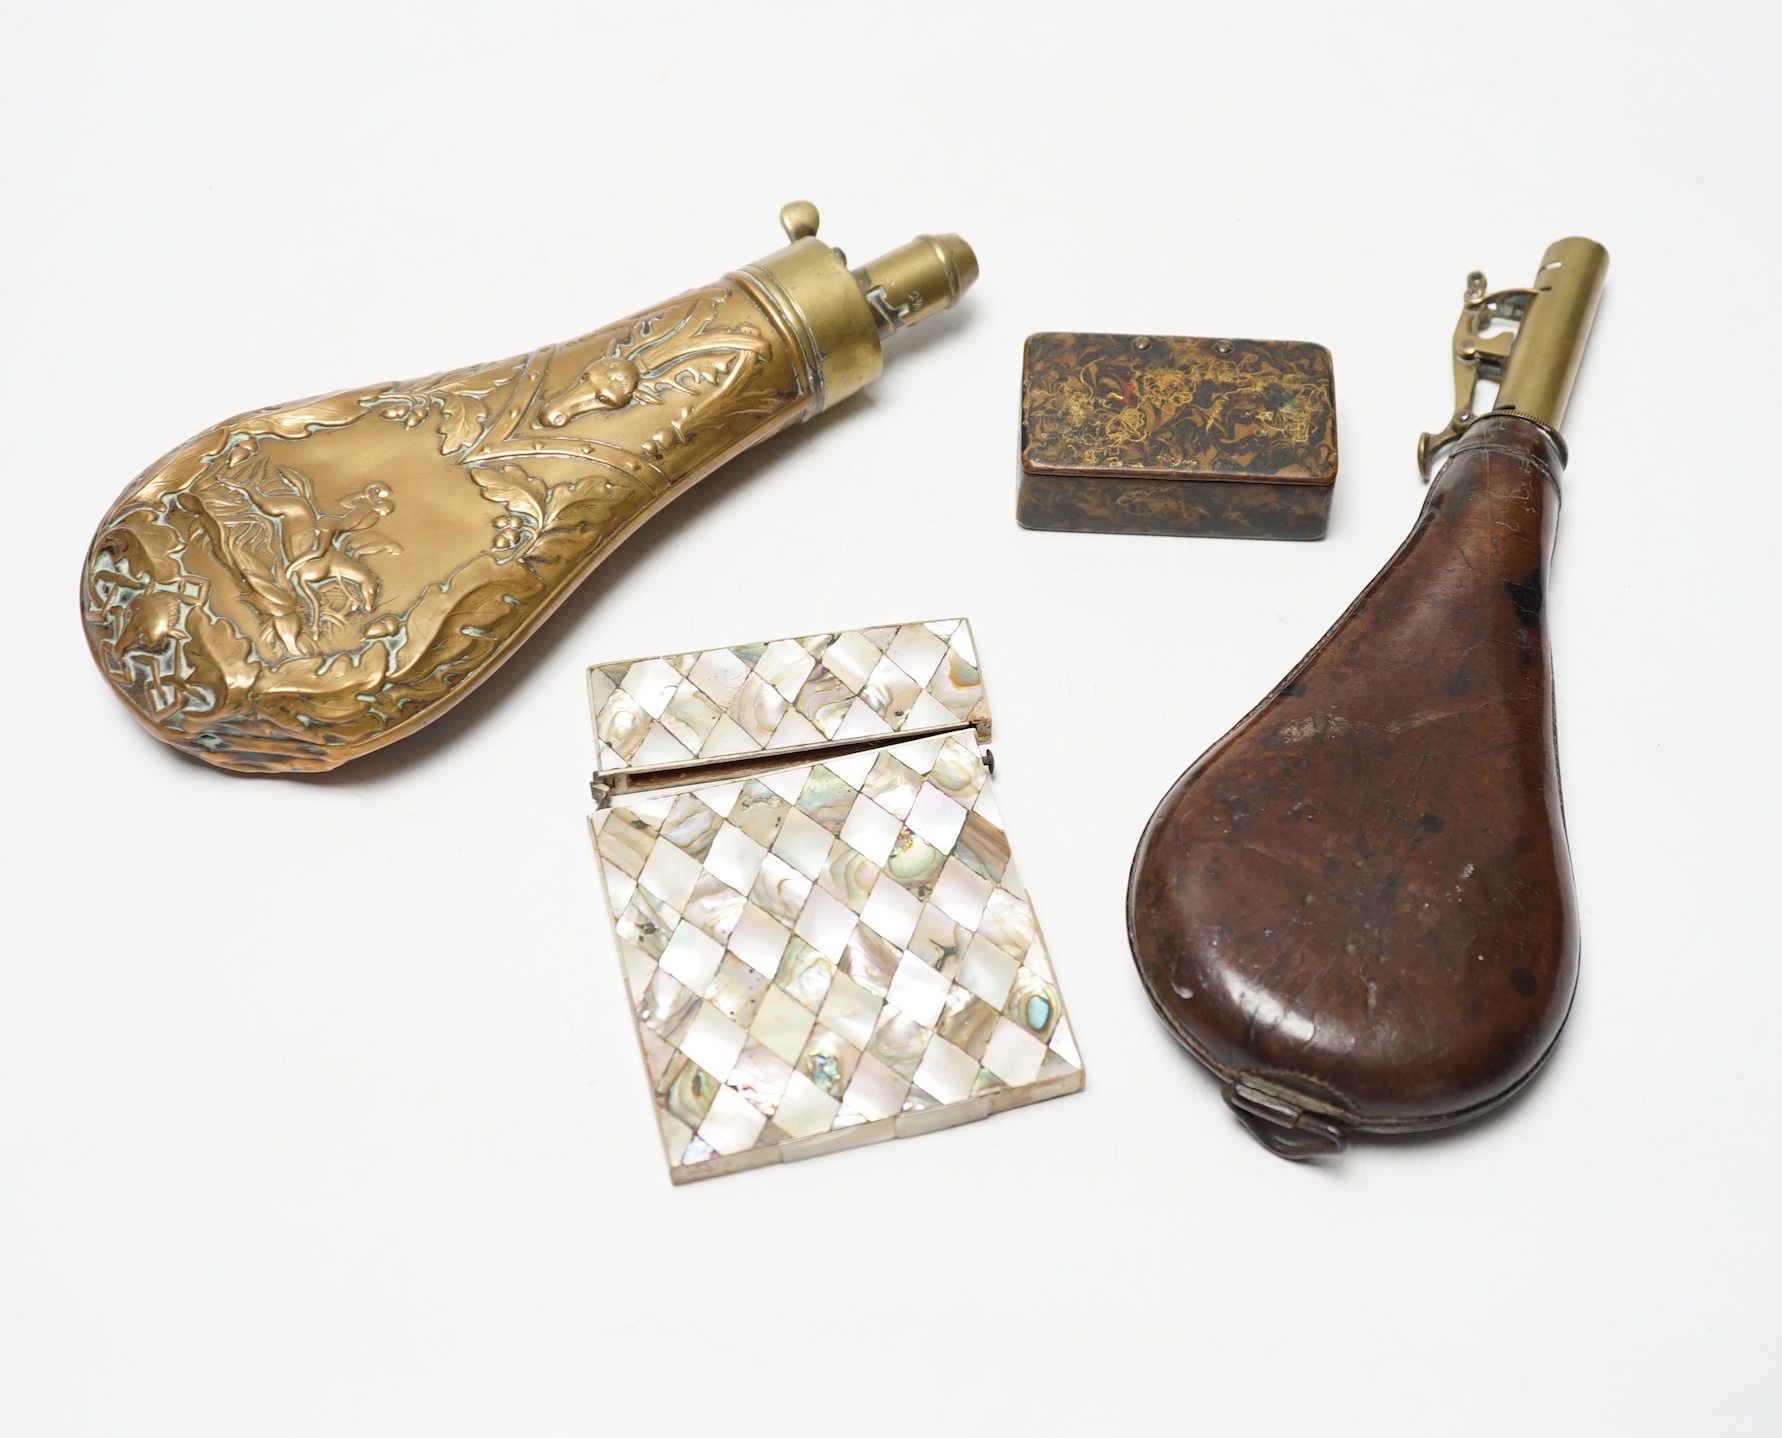 A Victorian embossed brass powder flask, a leather shot flask and a Victorian mother of pearl and abalone calling card case